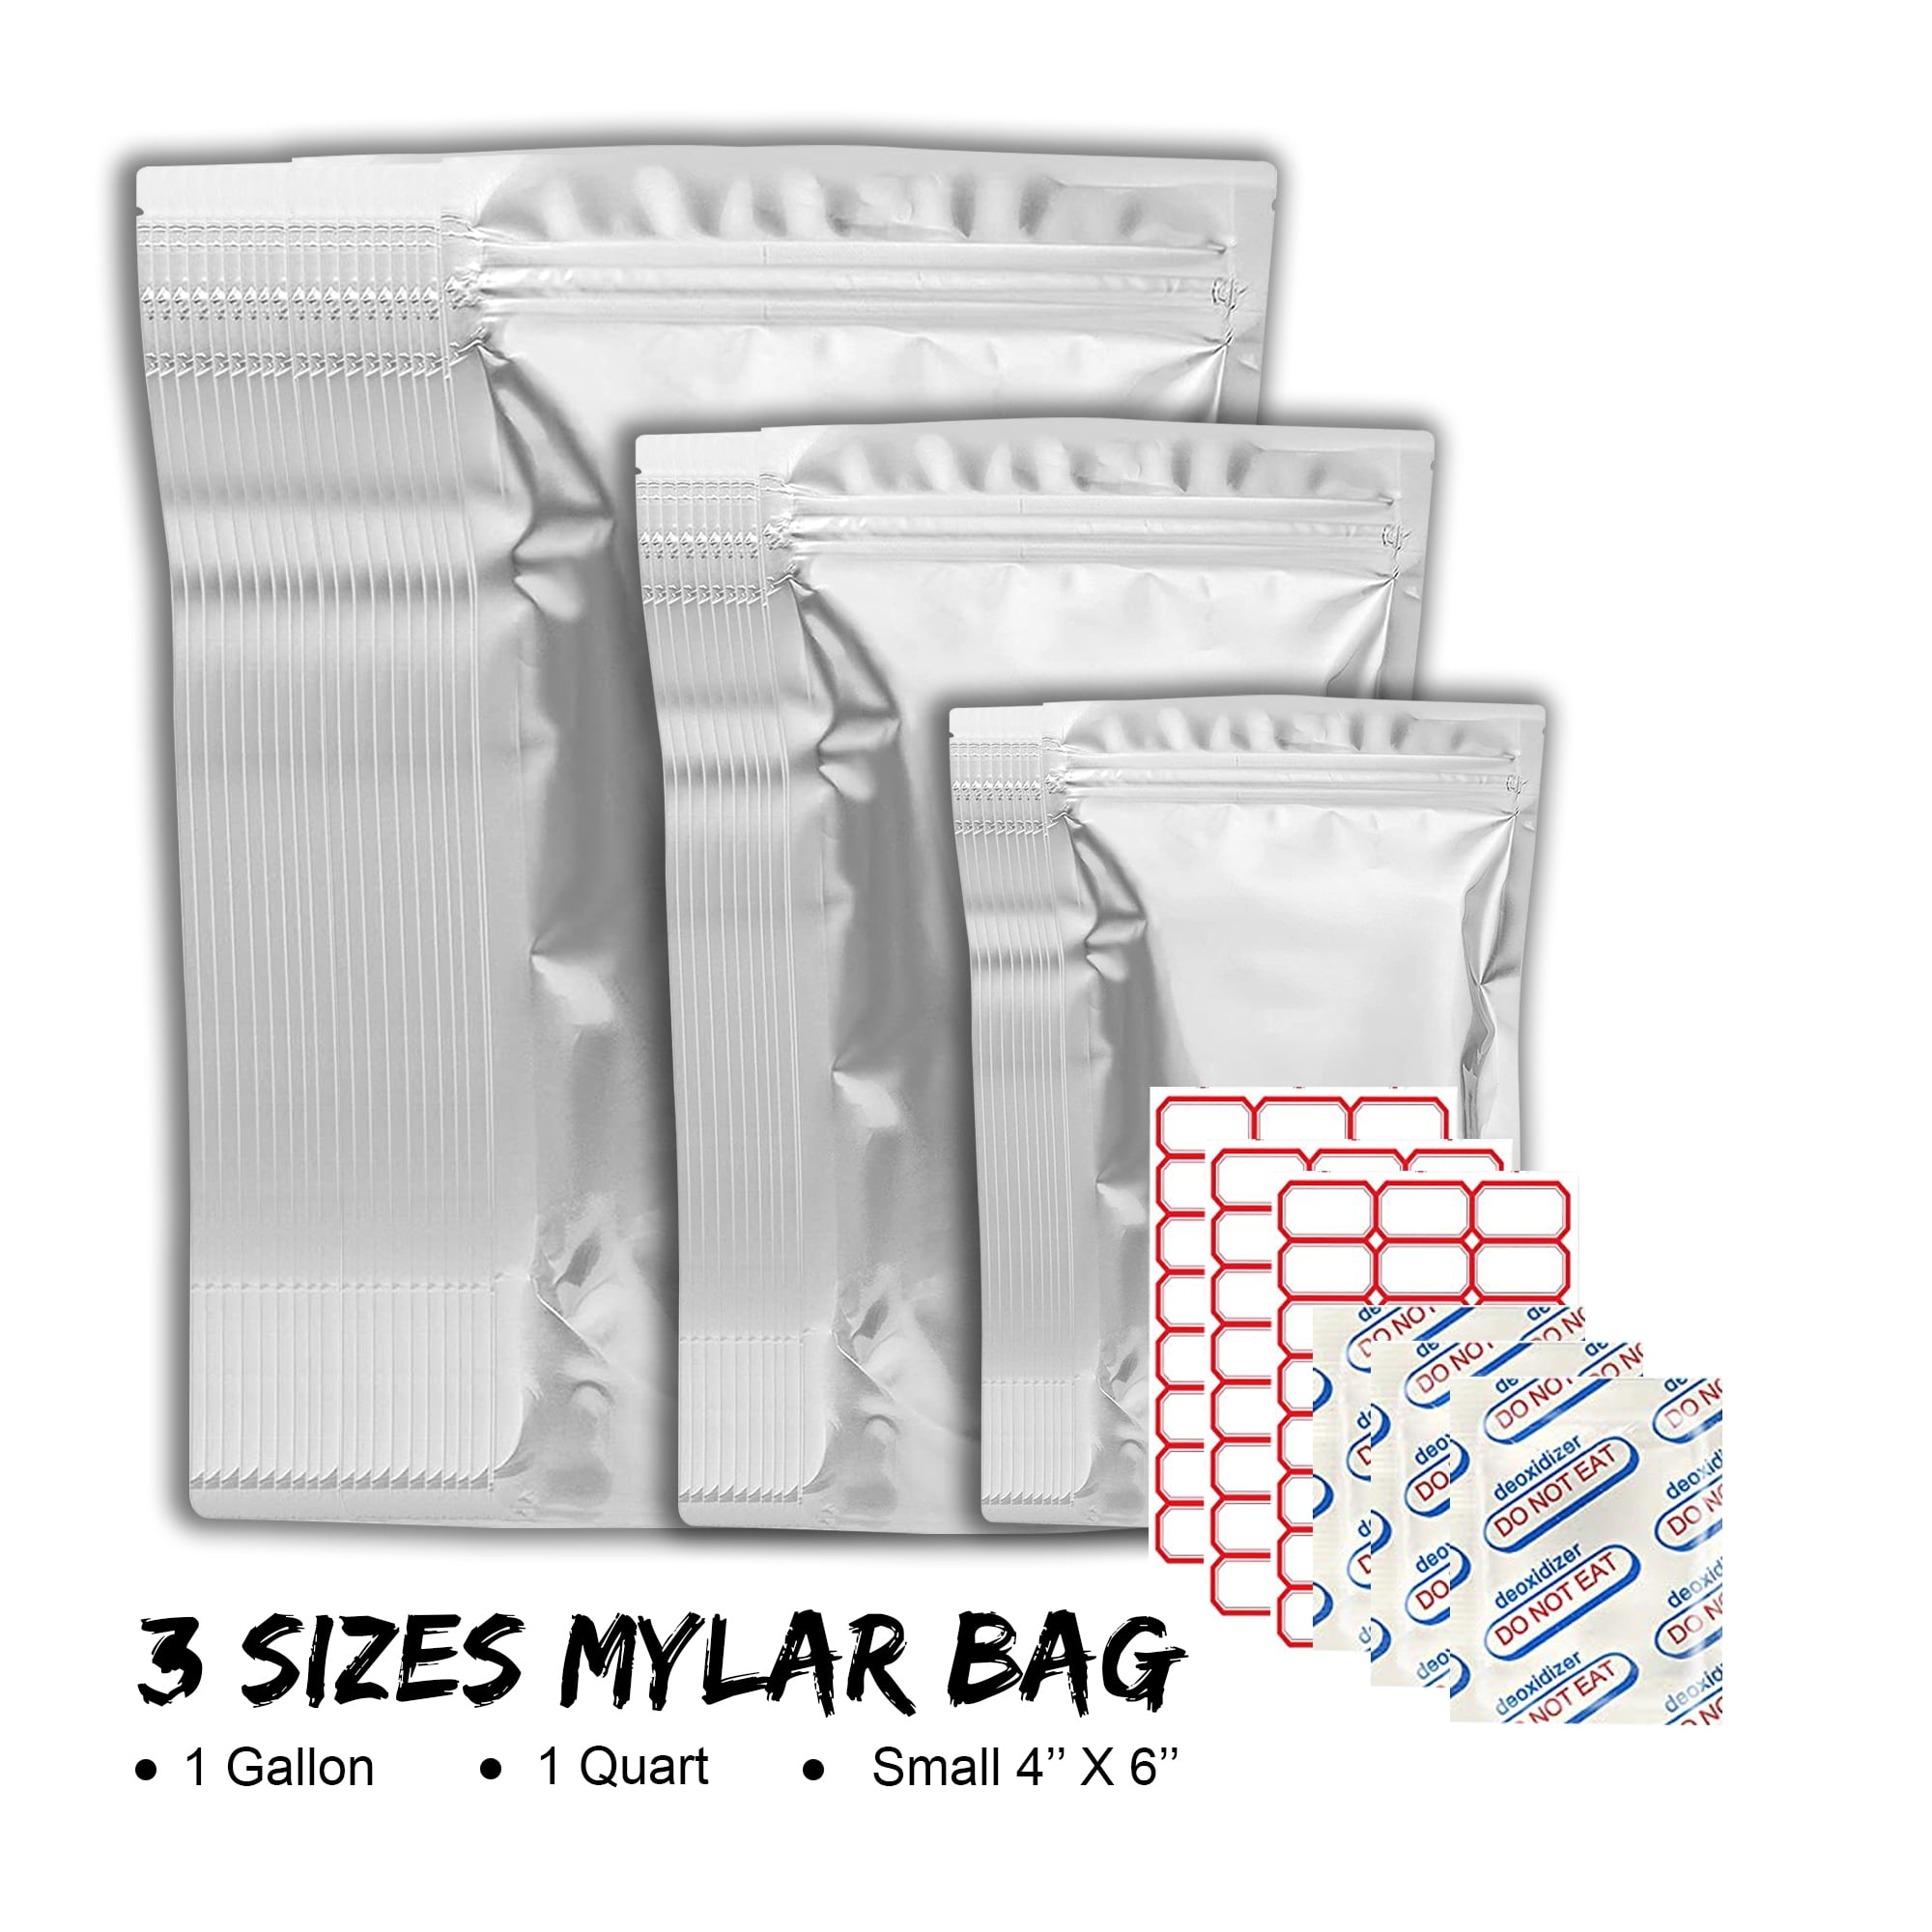 100-pack Large 14 x 10 Zip-lock Mylar Bags for Food Storage 1 Gallon  Resealable Stand-up Aluminum Foil Bags Silver Smell Proof Pouch Bags with  Clear